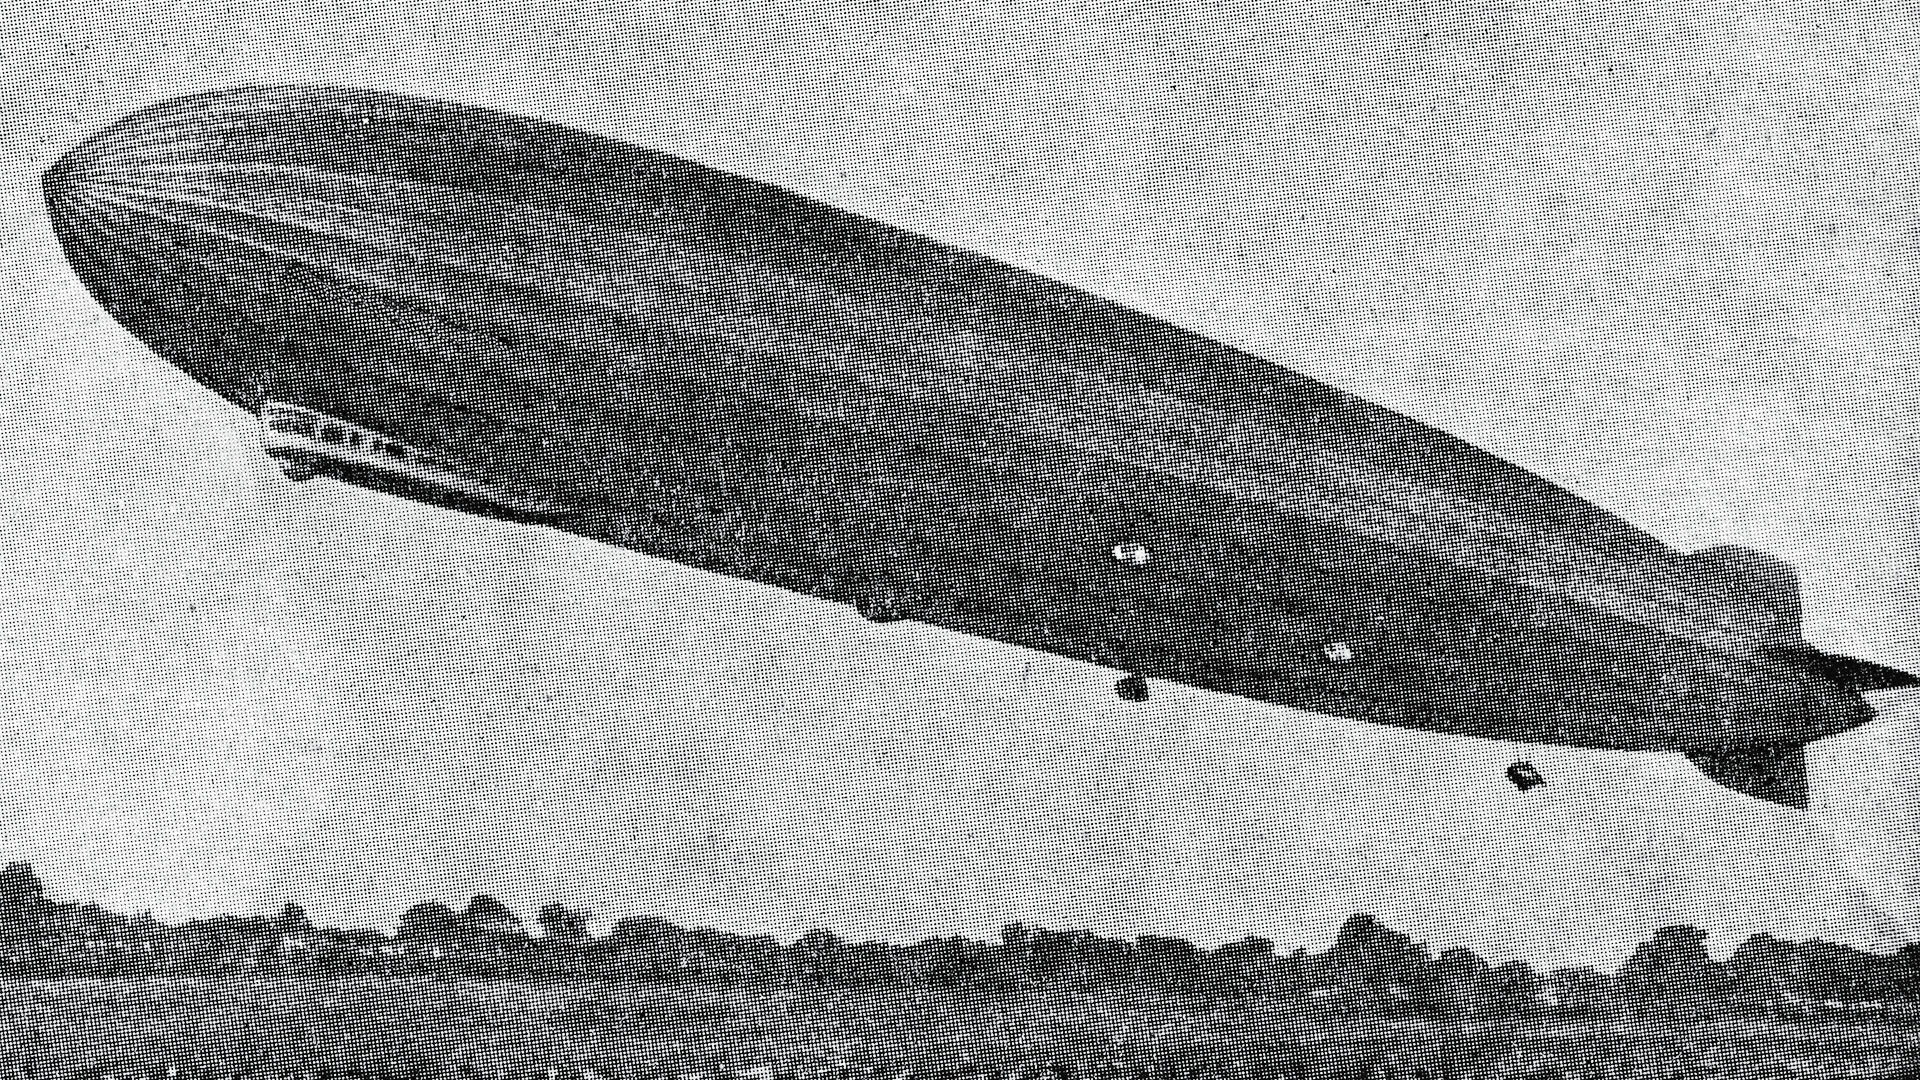 Airship in black and white